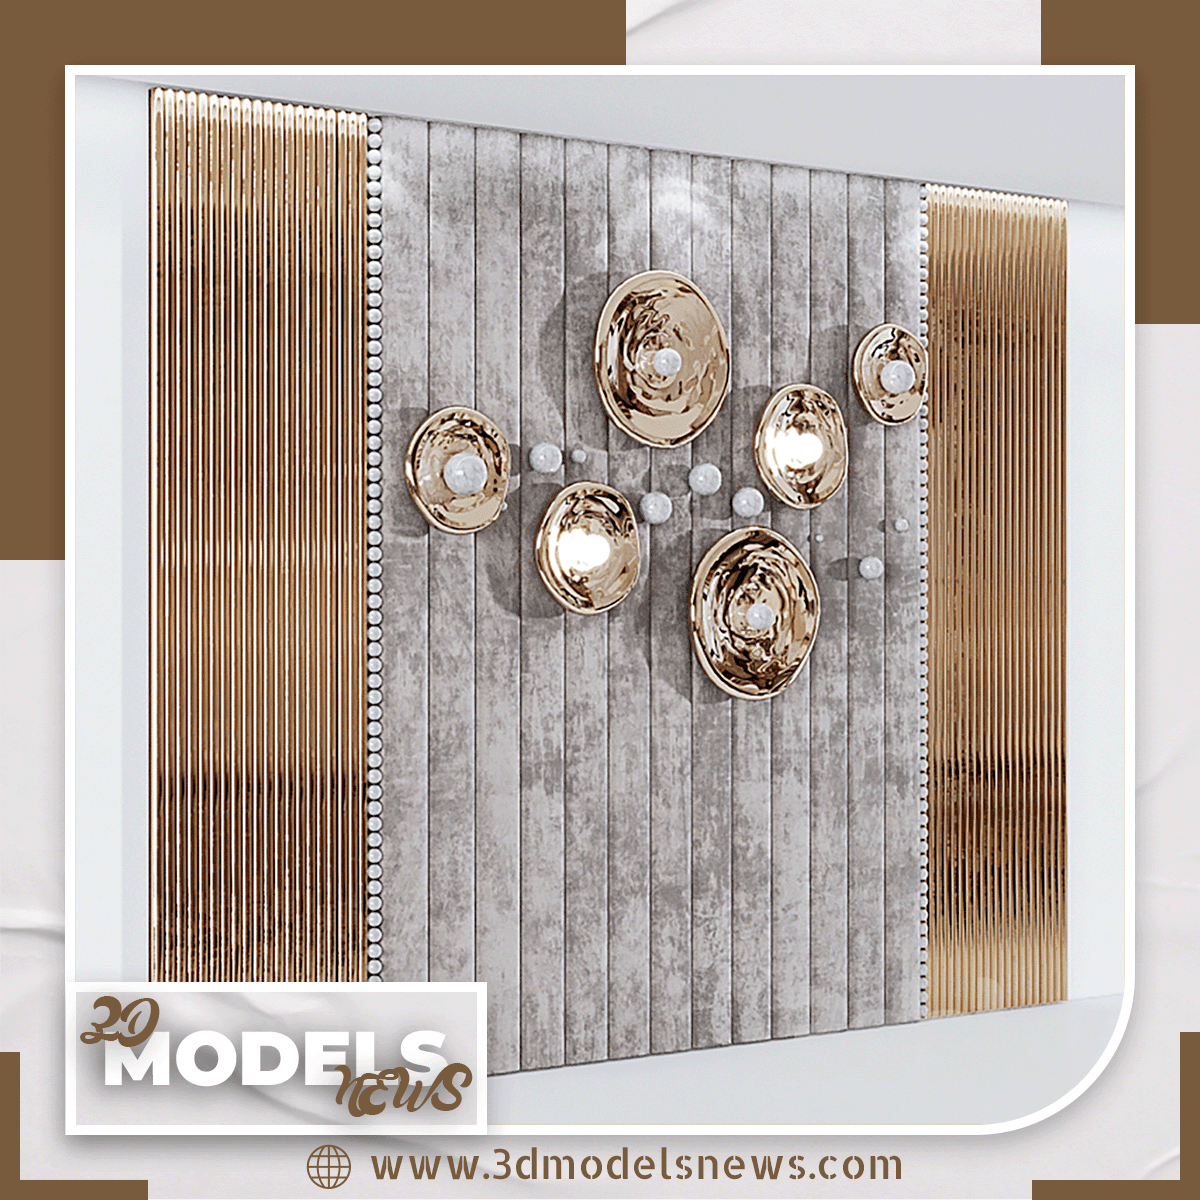 Headboard model made of soft beige panels and 3d decor